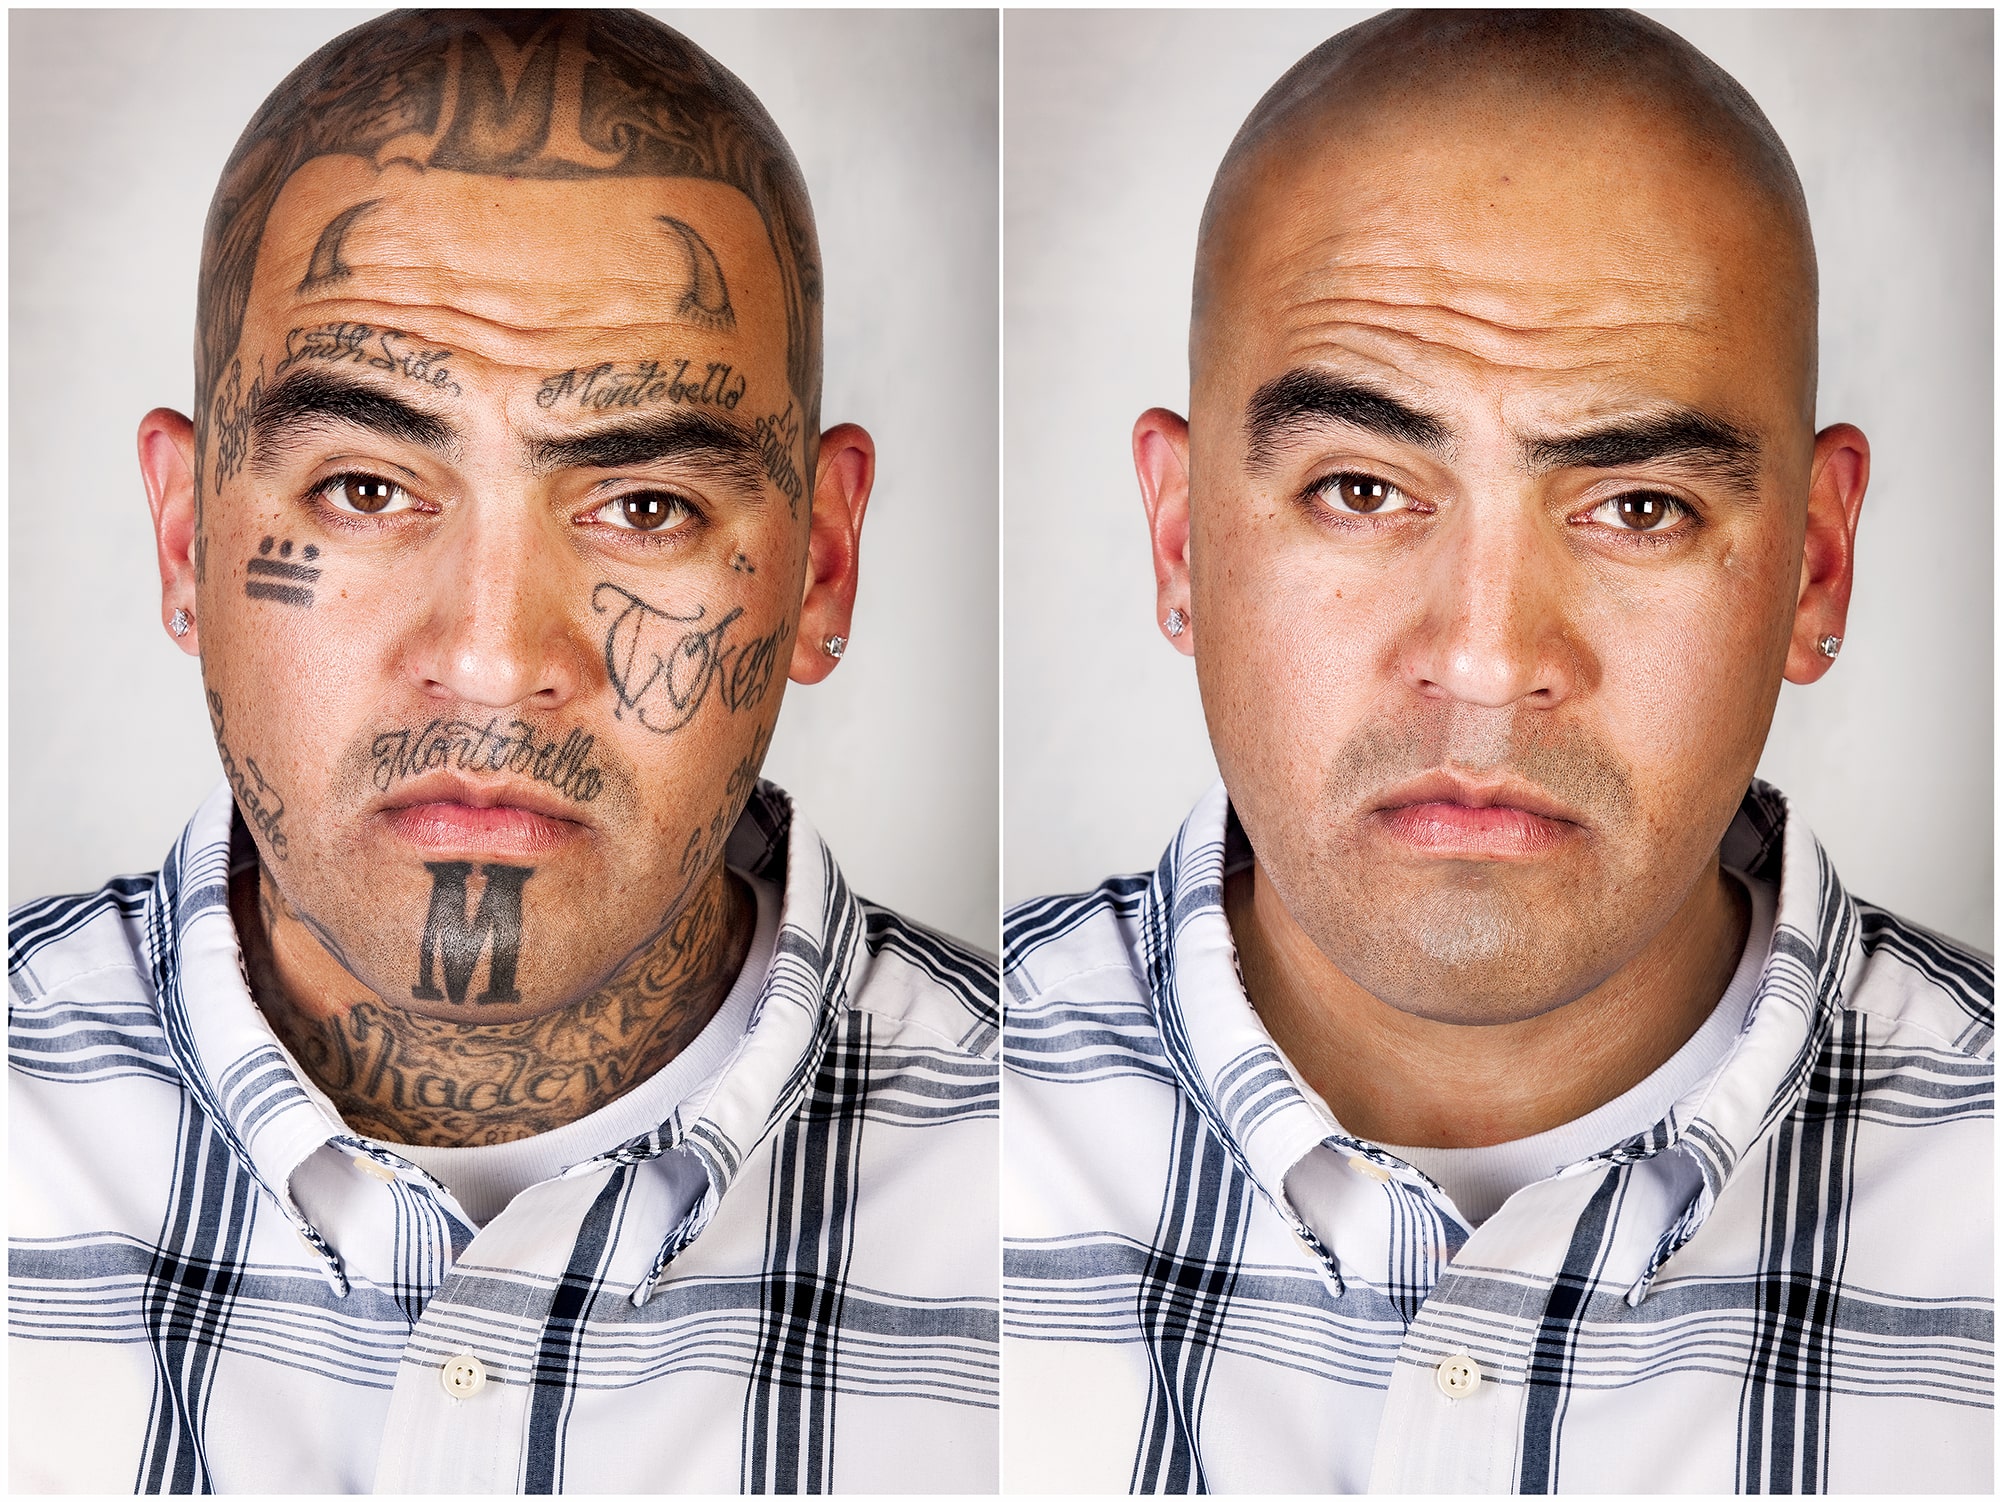 “I joined the gangs when I was a kid. I got in at 11 years old and then like two months later I got into my neighborhood (gang) I went to juvenile hall. I was only supposed to do six months, but the things that I did in there...pretty much, well, you can say I committed another crime in there. It made my stay go from six months to about seven years. They kept me there till I was 18 years old. I did all those years straight, and then I got out at 18 and lasted out here for four years. I got busted and went back to prison for nine years and now I am out. I have been out for nine and a half months now. I pretty much did most of my me in there, more than I have spent out here.”